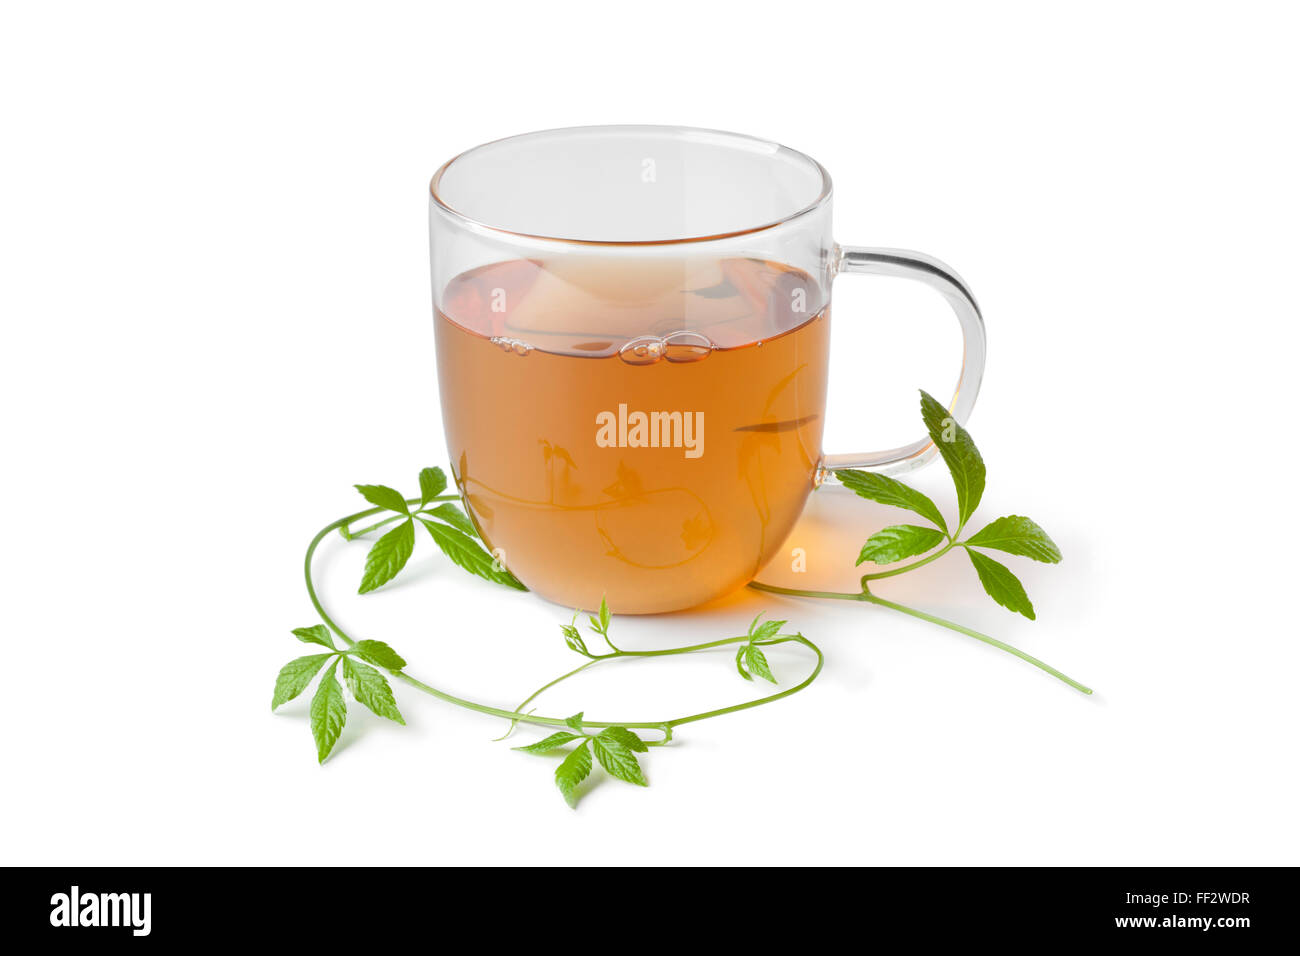 Cup of tea with fresh jiaogulan herb on white background Stock Photo